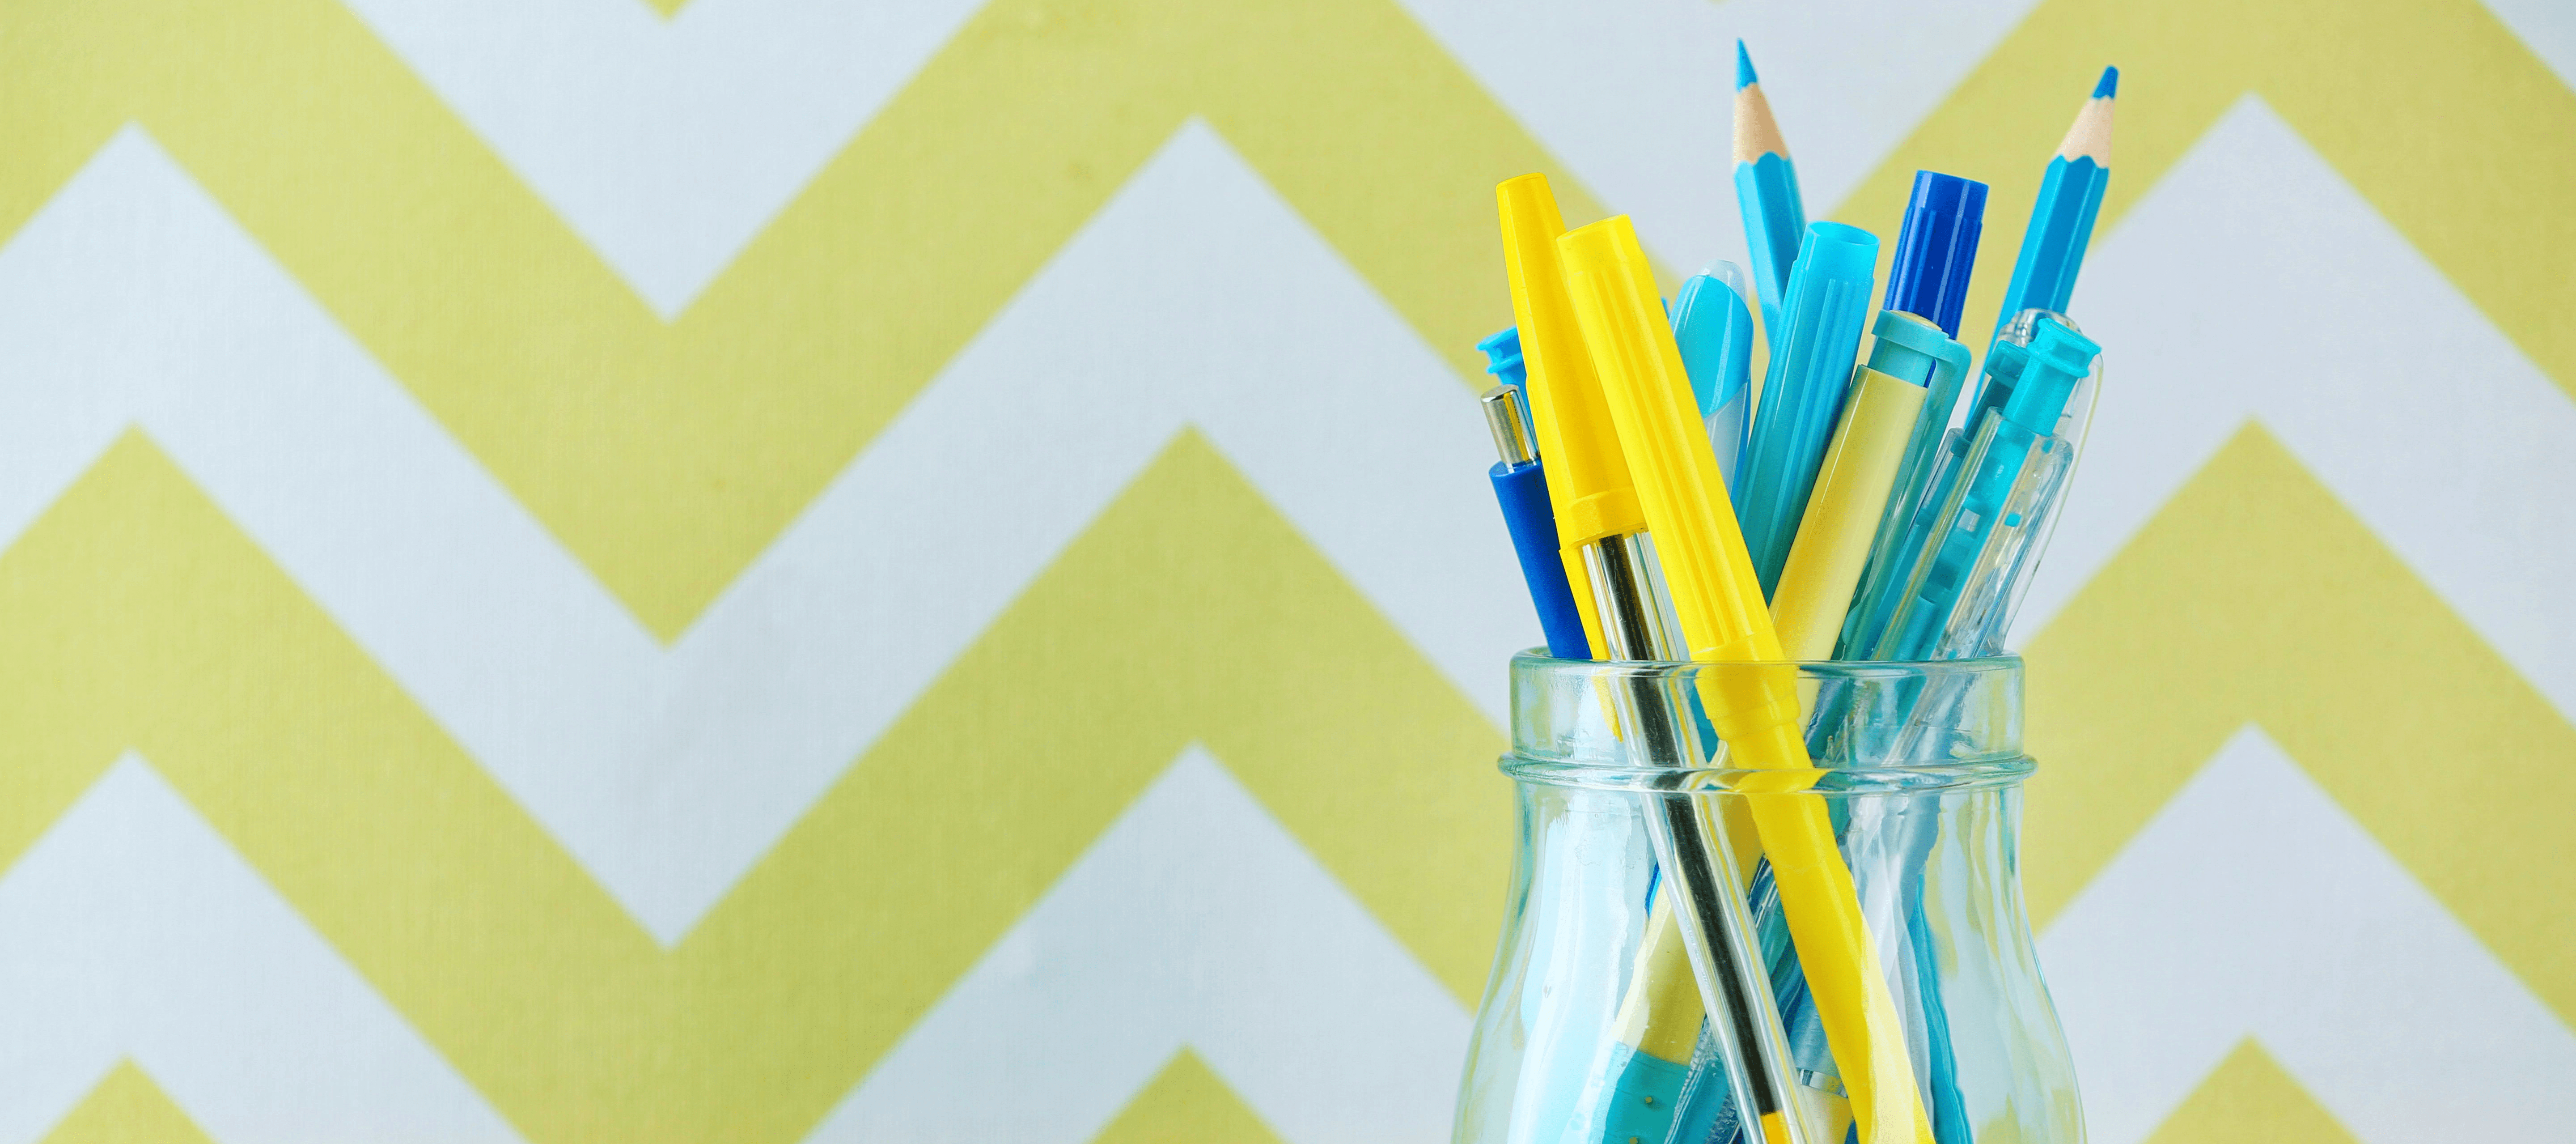 Jar being reused to hold pens and pencils, against a yellow and white herringbone wall pattern.